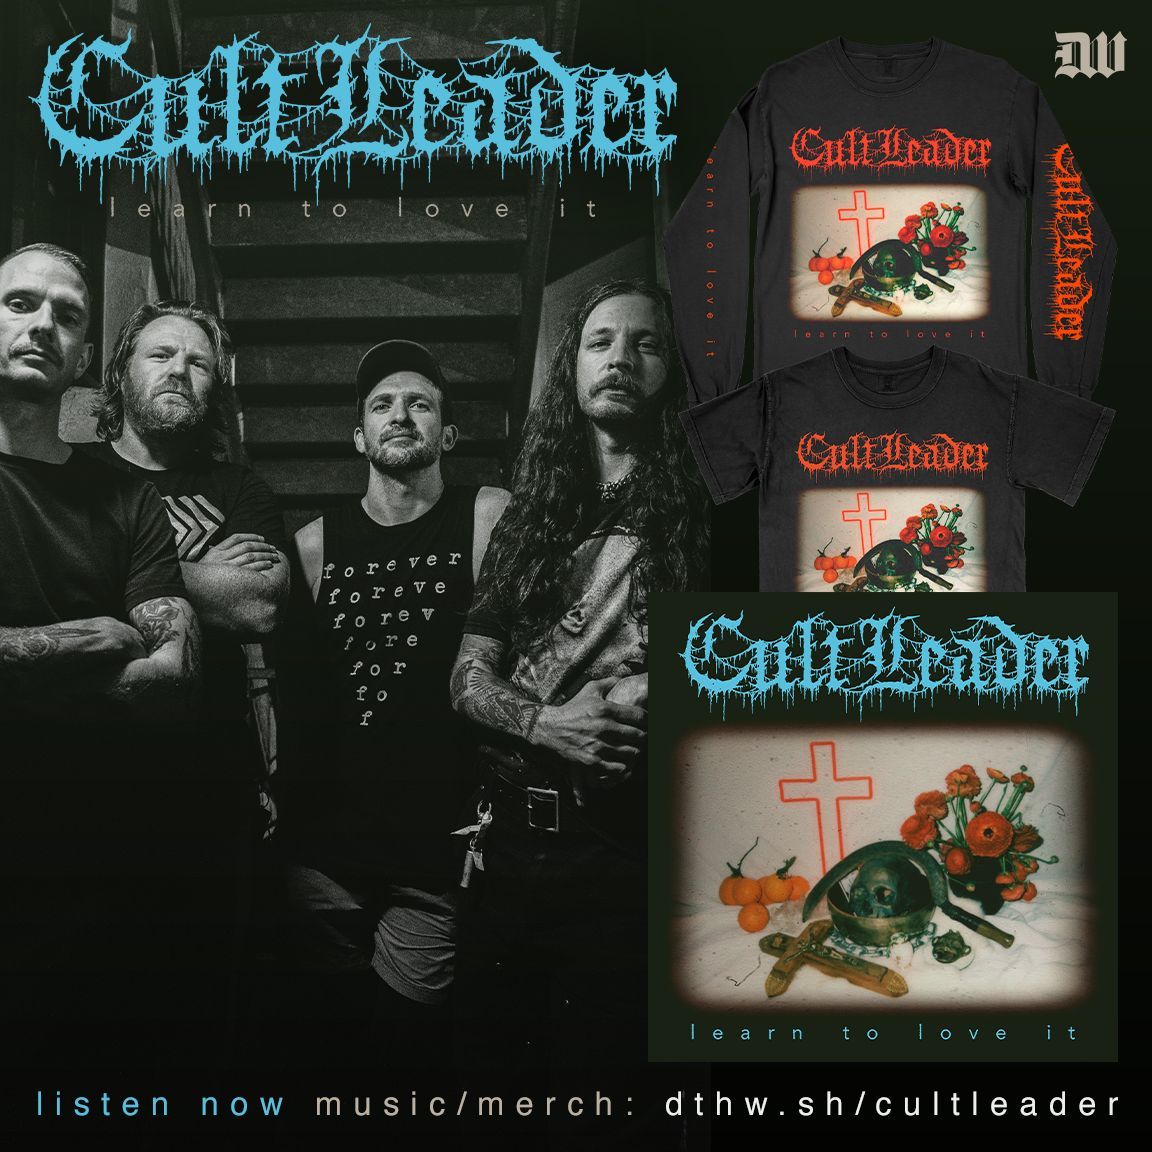 Cult Leader 'Learn To Love It' Streaming everywhere right now! Watch the video now at cultleadermusic.com #CultLeader #LearnToLoveIt #DeathwishInc